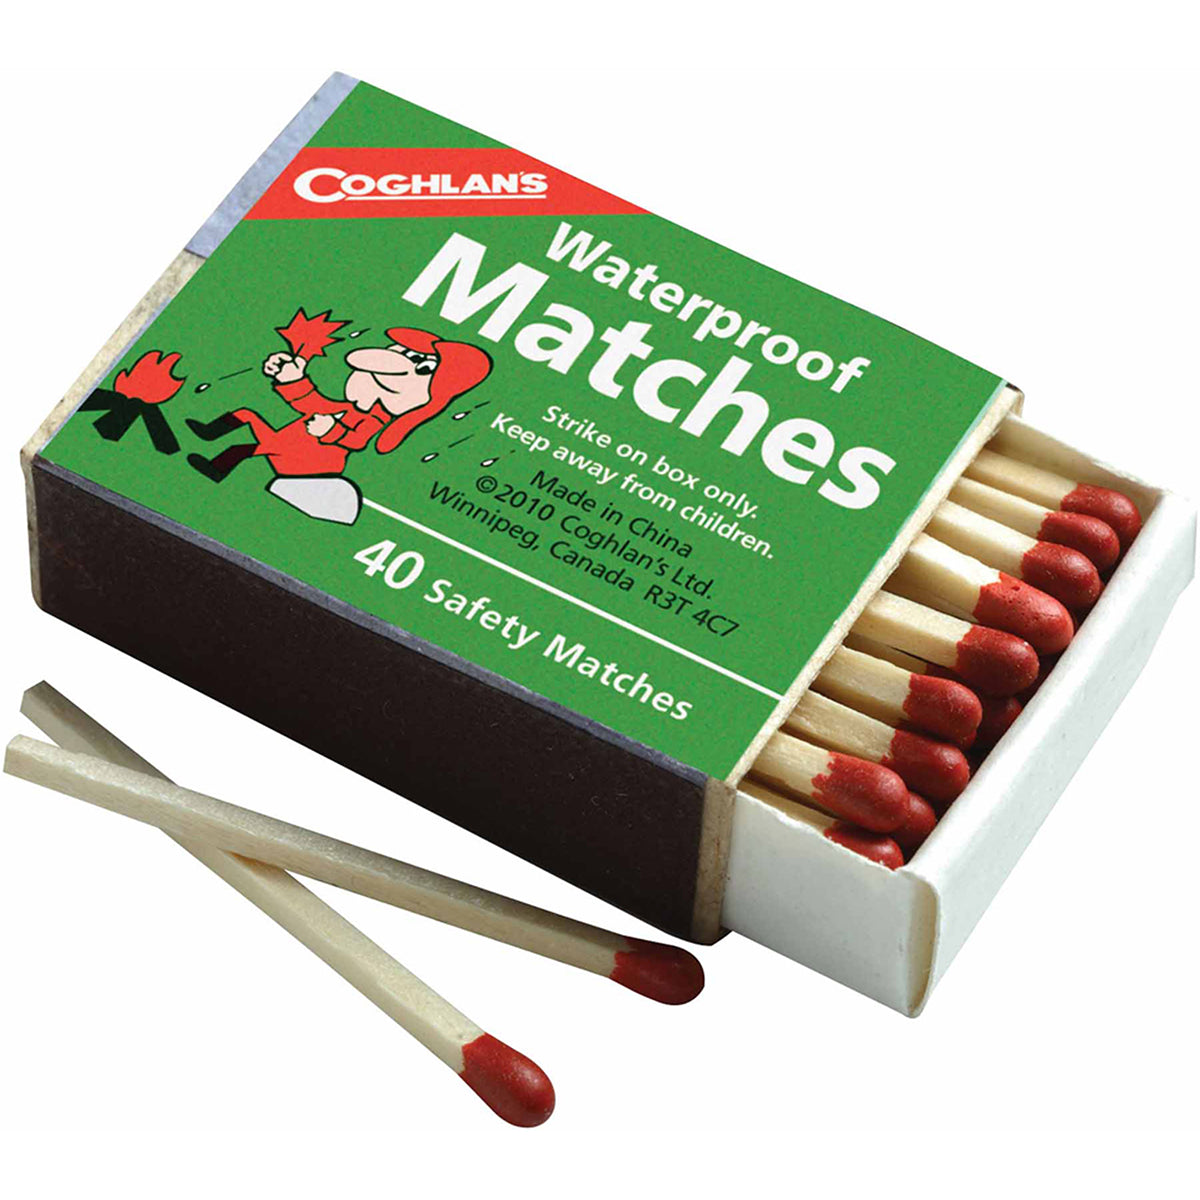 Coghlan's Waterproof Matches (30 Boxes), 1,200 Total Matches, Safety w/ Striker Coghlan's